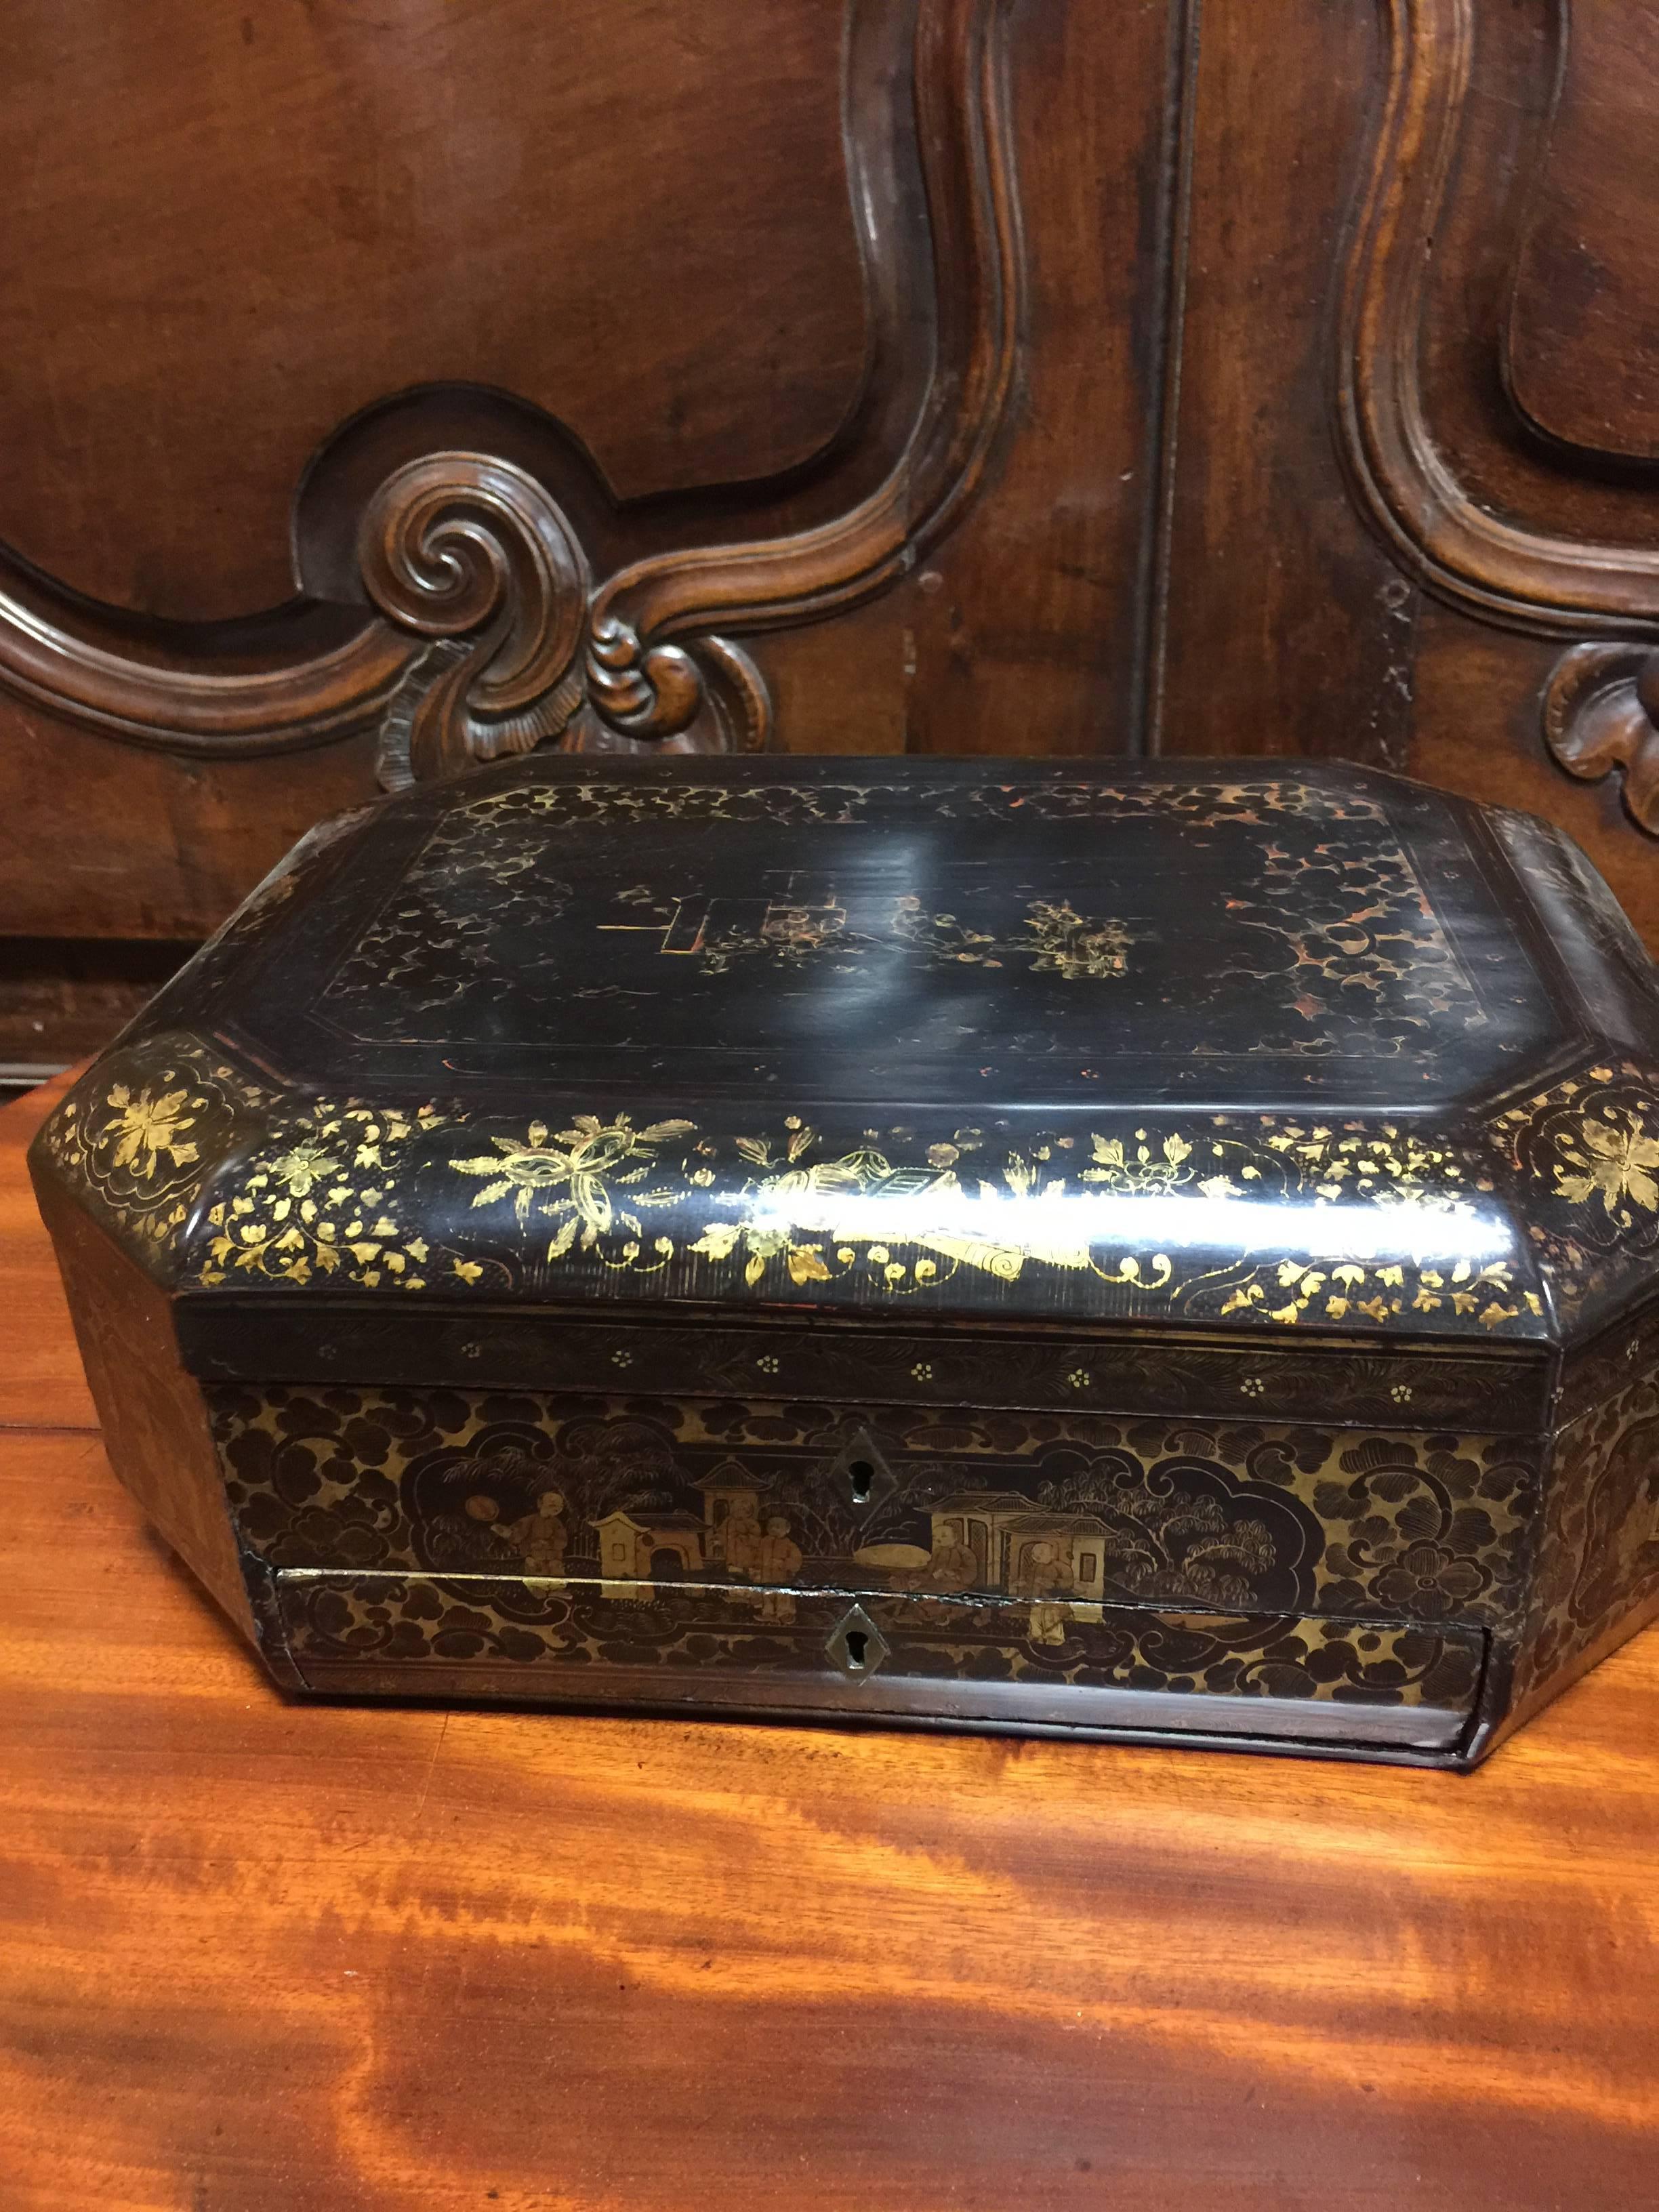 19th century lacquered chinoiserie sewing box from France. 
Missing feet.
Decorative accessory, coffee table item, bookshelf accent.